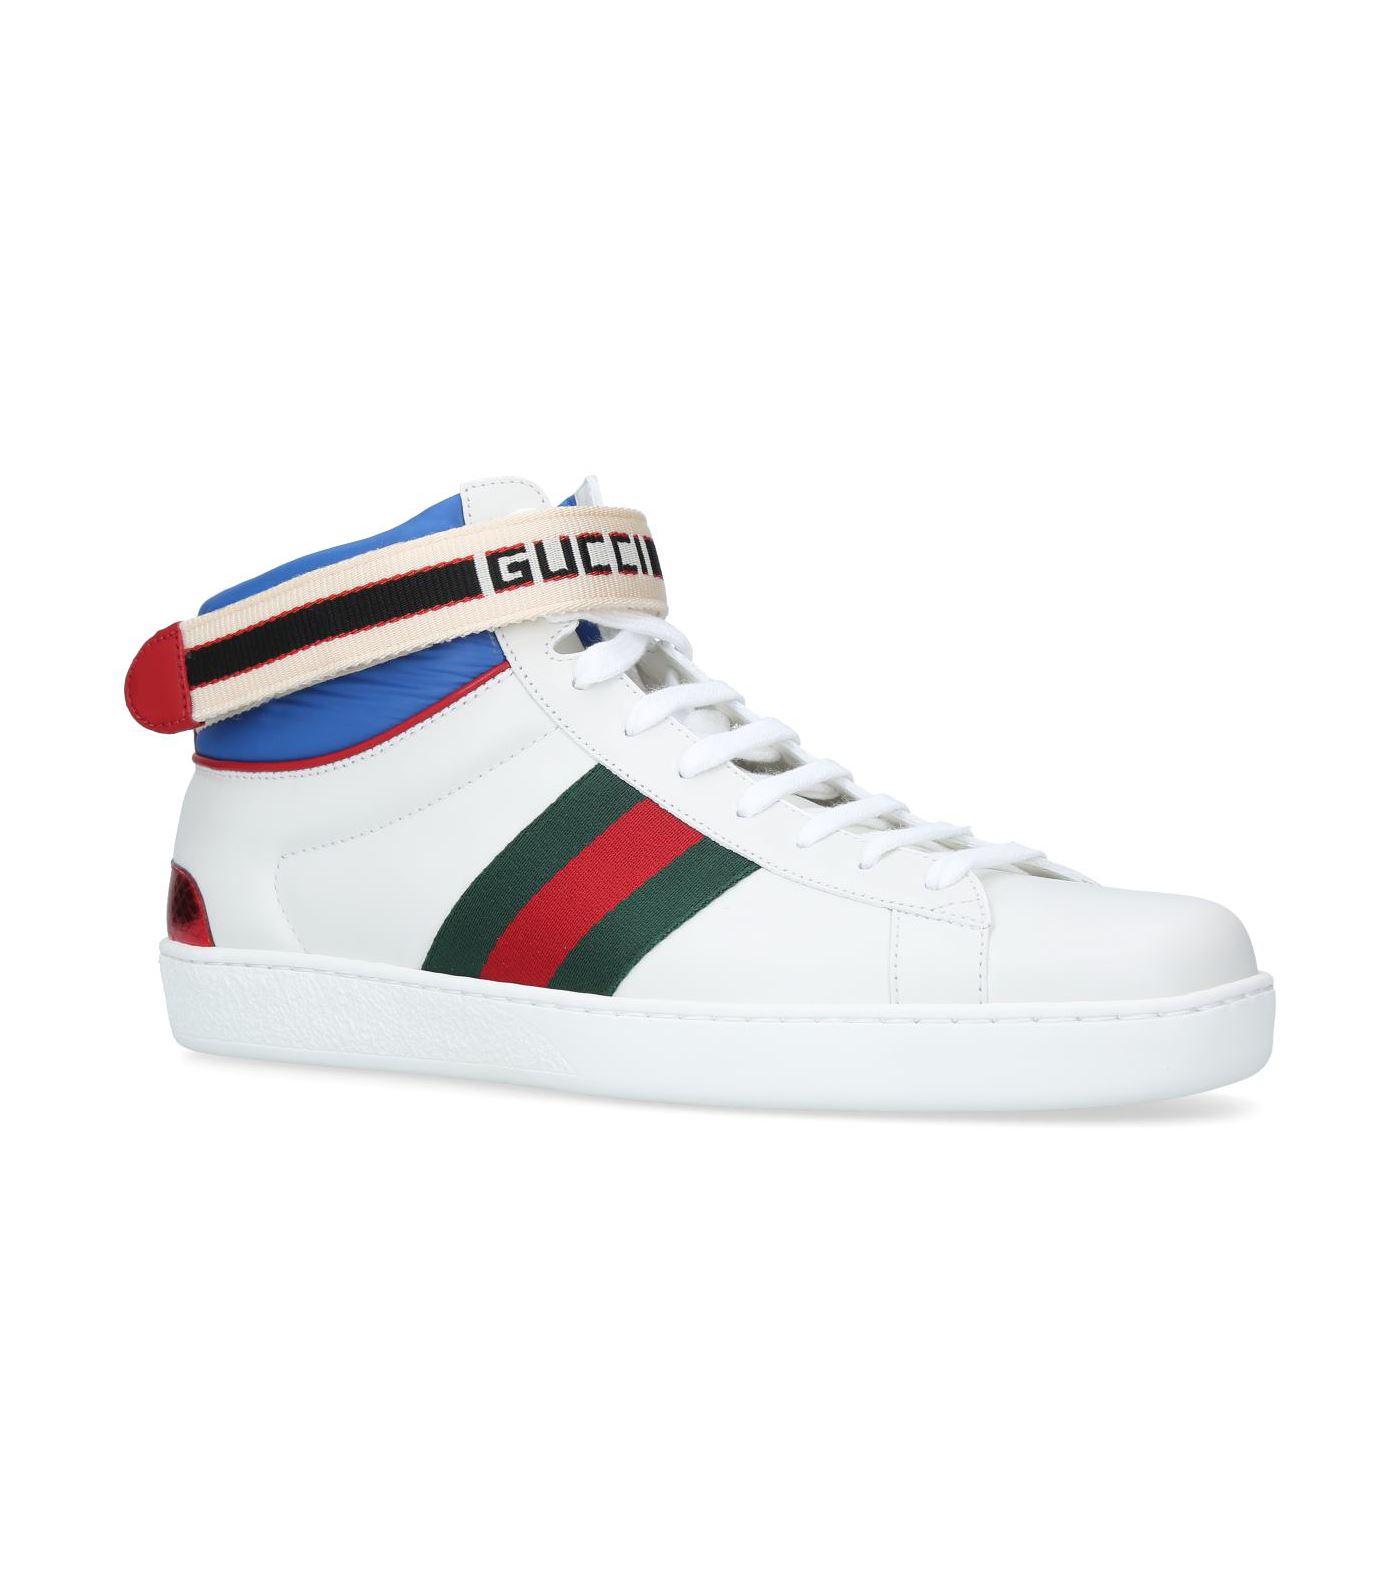 Gucci Ace High-top Sneakers in White for Men - Lyst